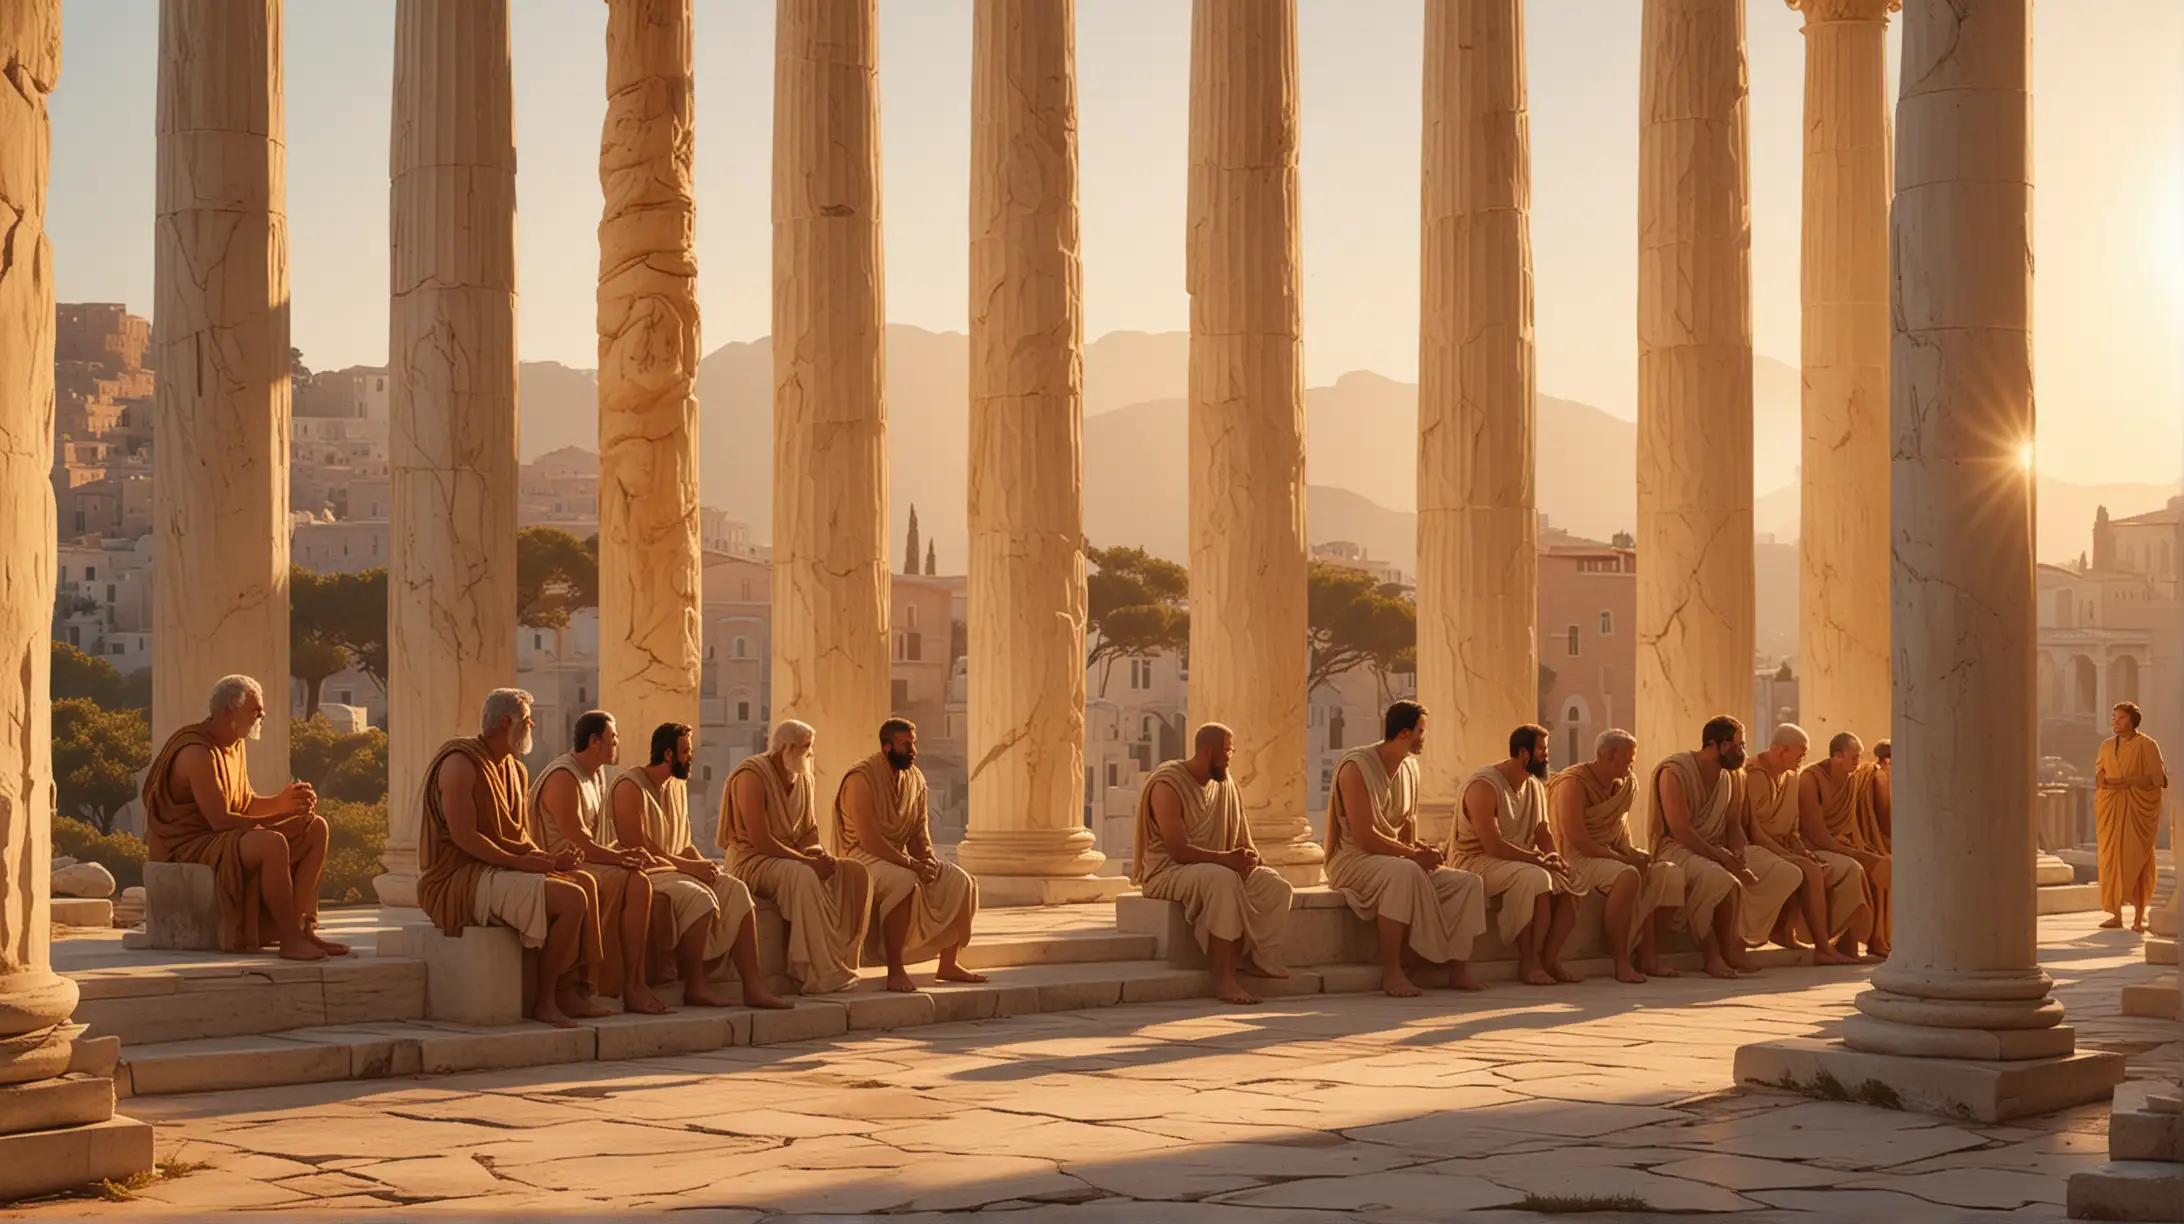 Stoic Philosophers in Deep Contemplation amid Ancient Greek Columns